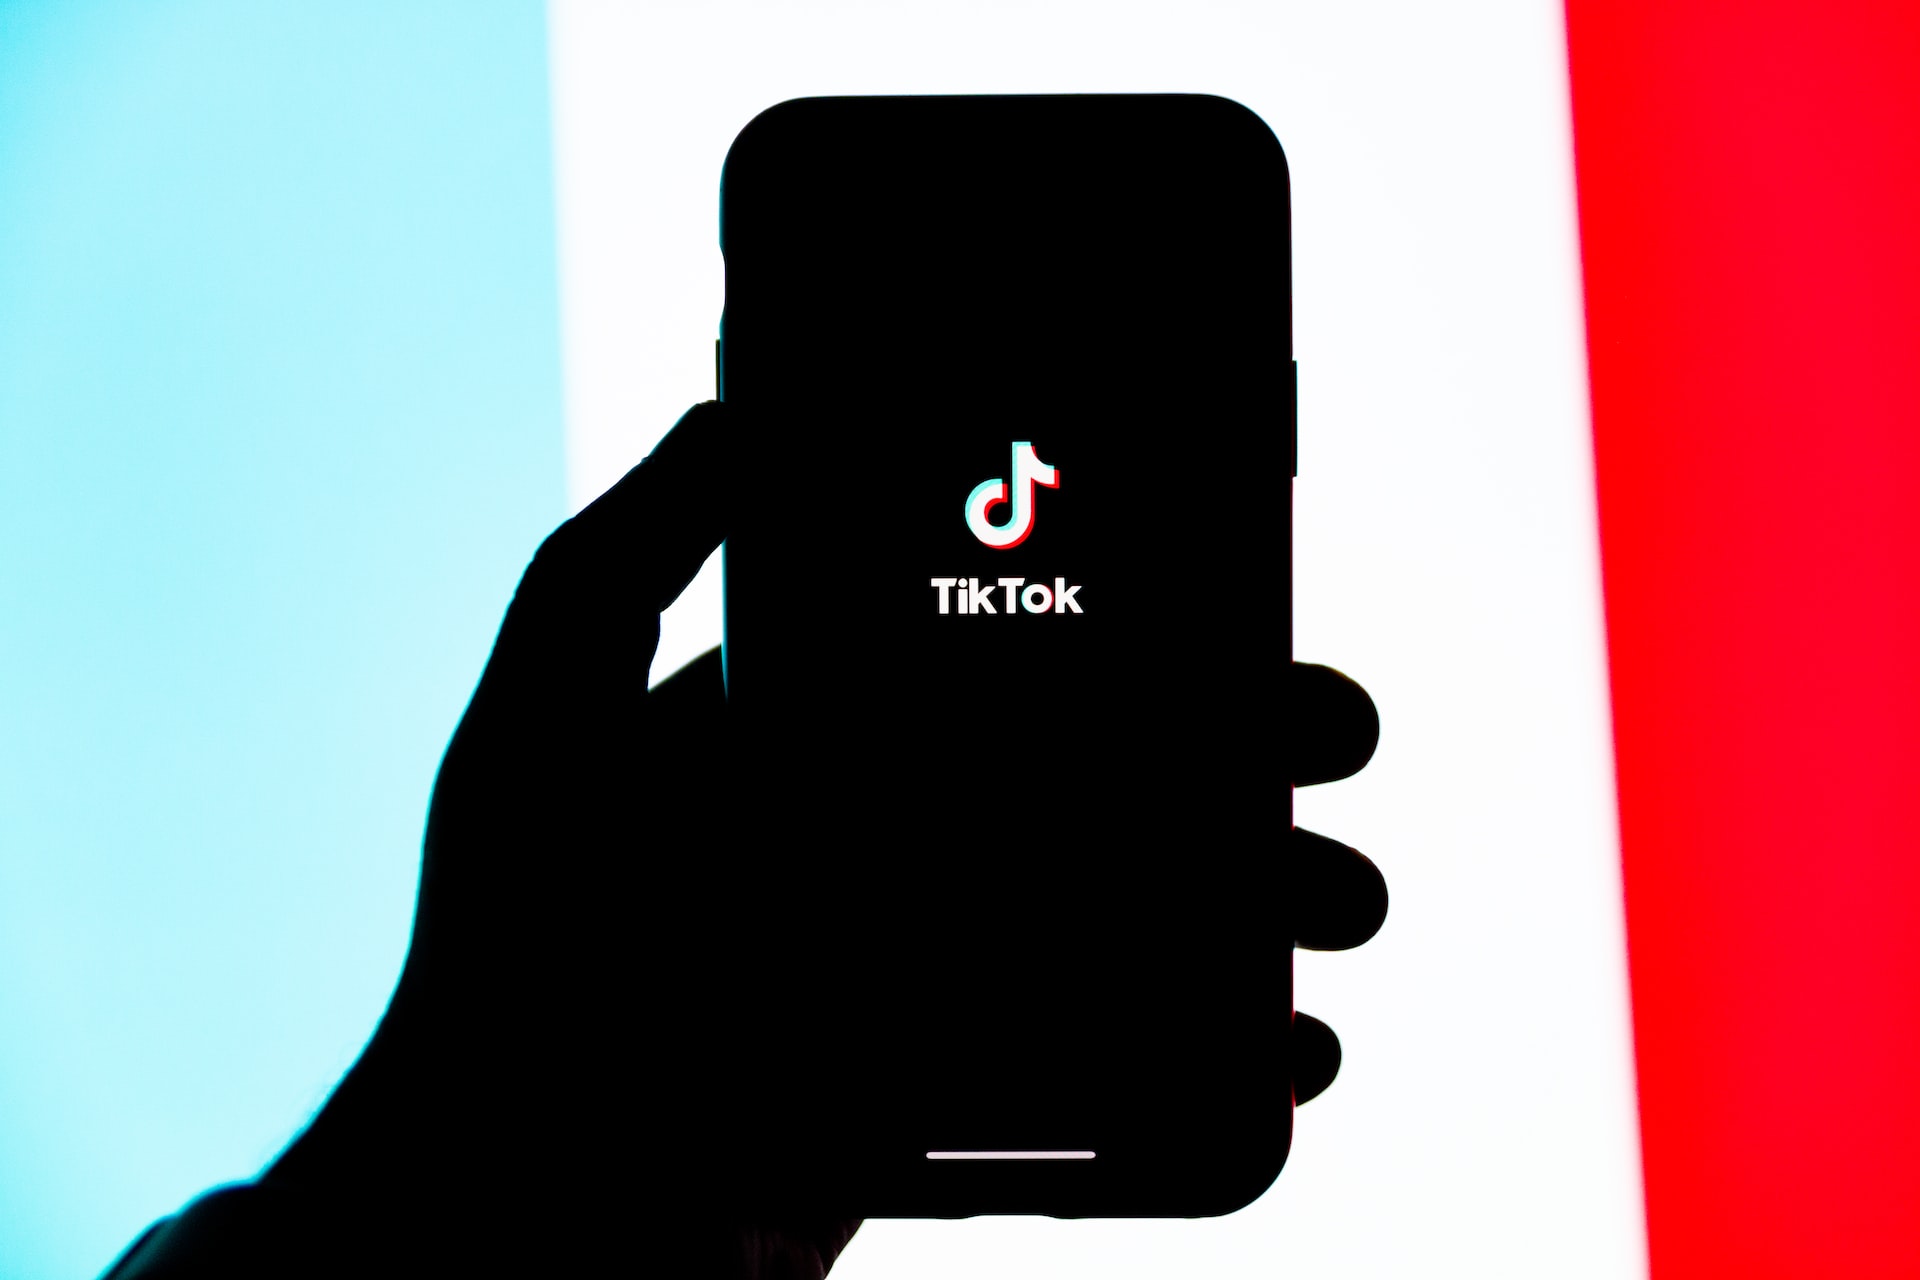 The TikTok owner denies that the Chinese government has access to the platform's data.